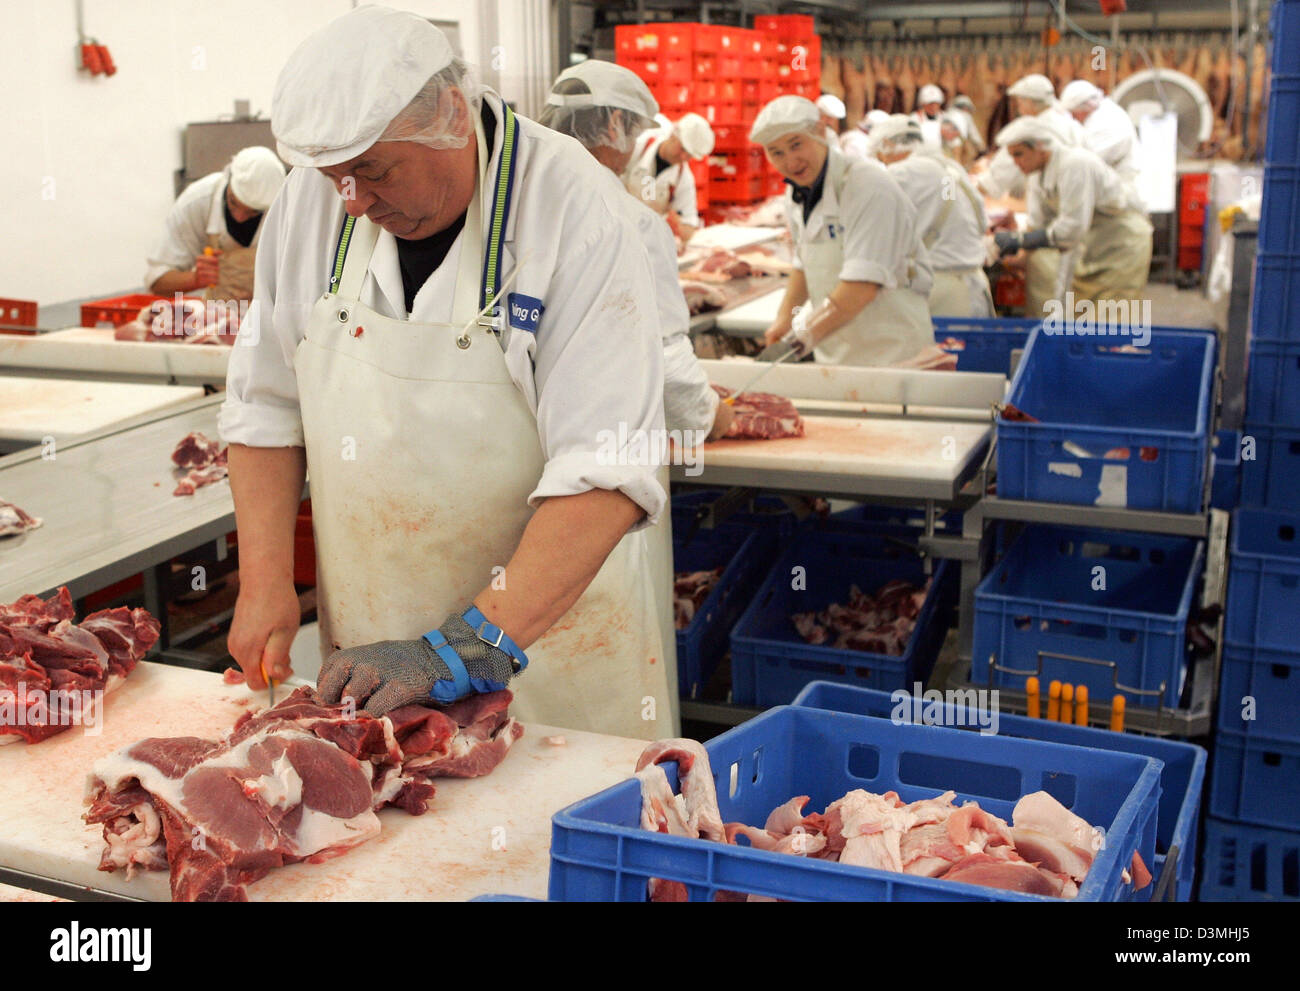 Employees of  'Ruegenwalder Muehle' prepare pork meat for the production of sausages at the company's factory site in Bad Zwischenahn, Germany, Thursday, 16 March 2006. The company makes amongst others the famous 'Teewurst' (smoked pork pate), which is a registered trademark since 1957. Photo: Ingo Wagner Stock Photo